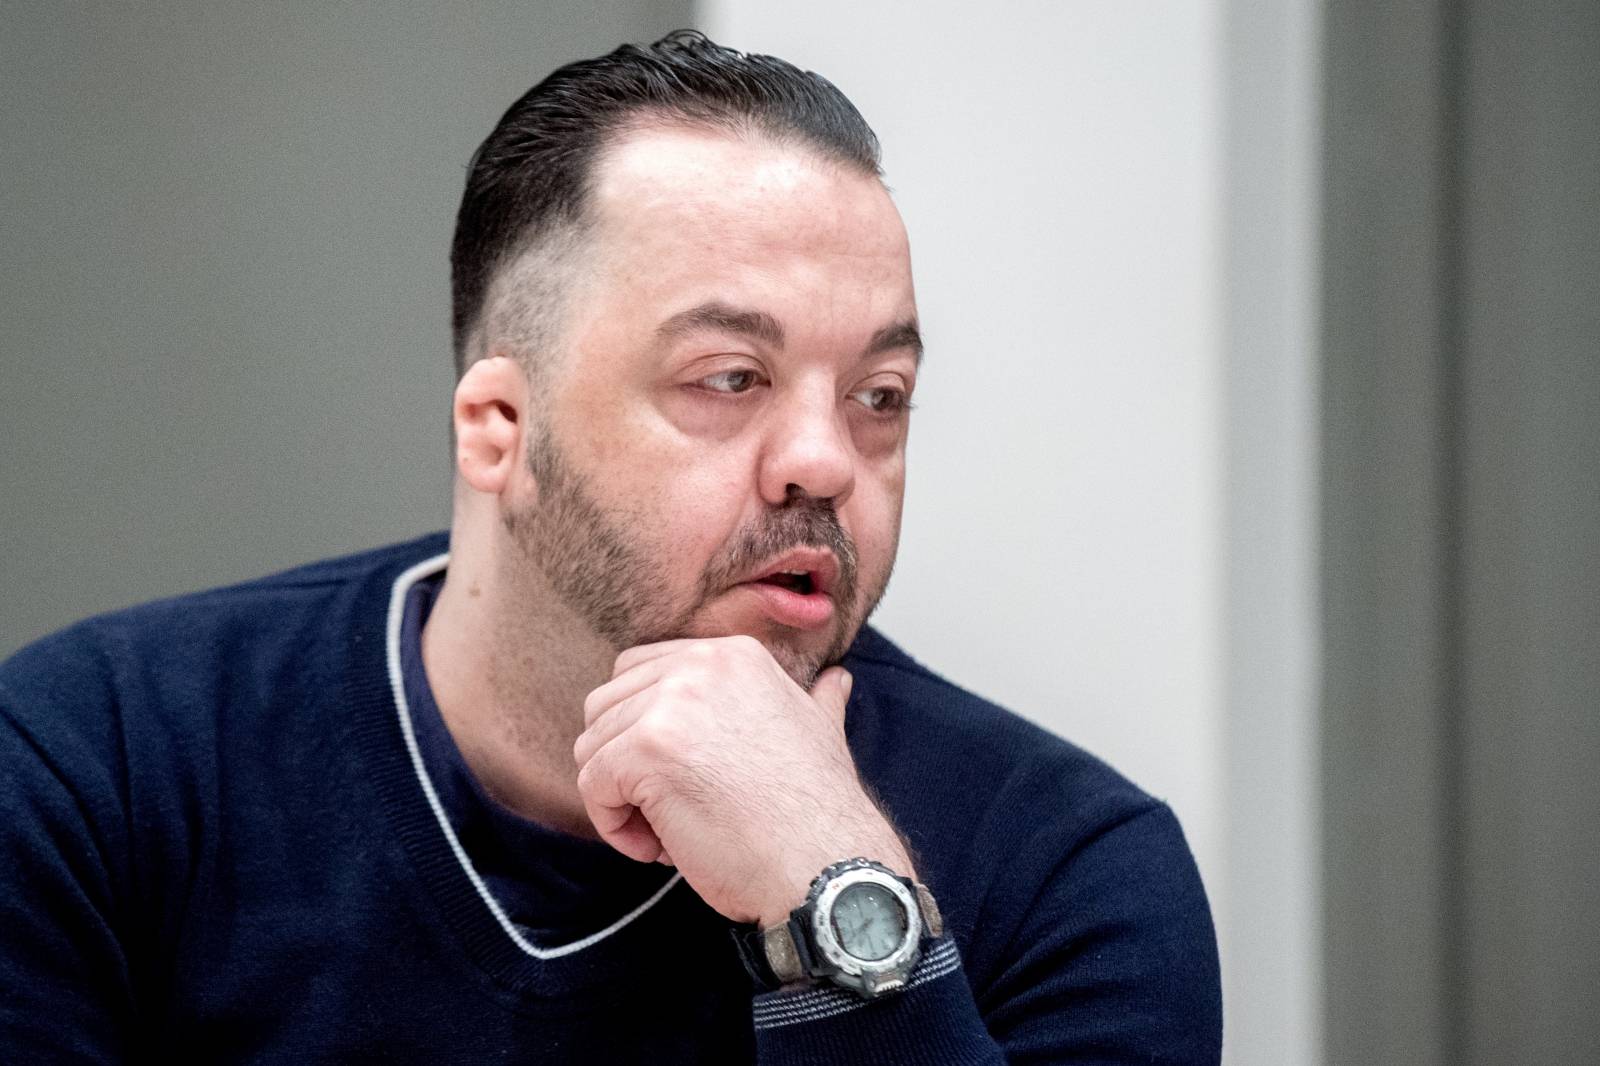 FILE PHOTO: Niels Hoegel, accused of murdering 100 patients at the clinics in Delmenhorst and Oldenburg, attends his trial in Oldenburg